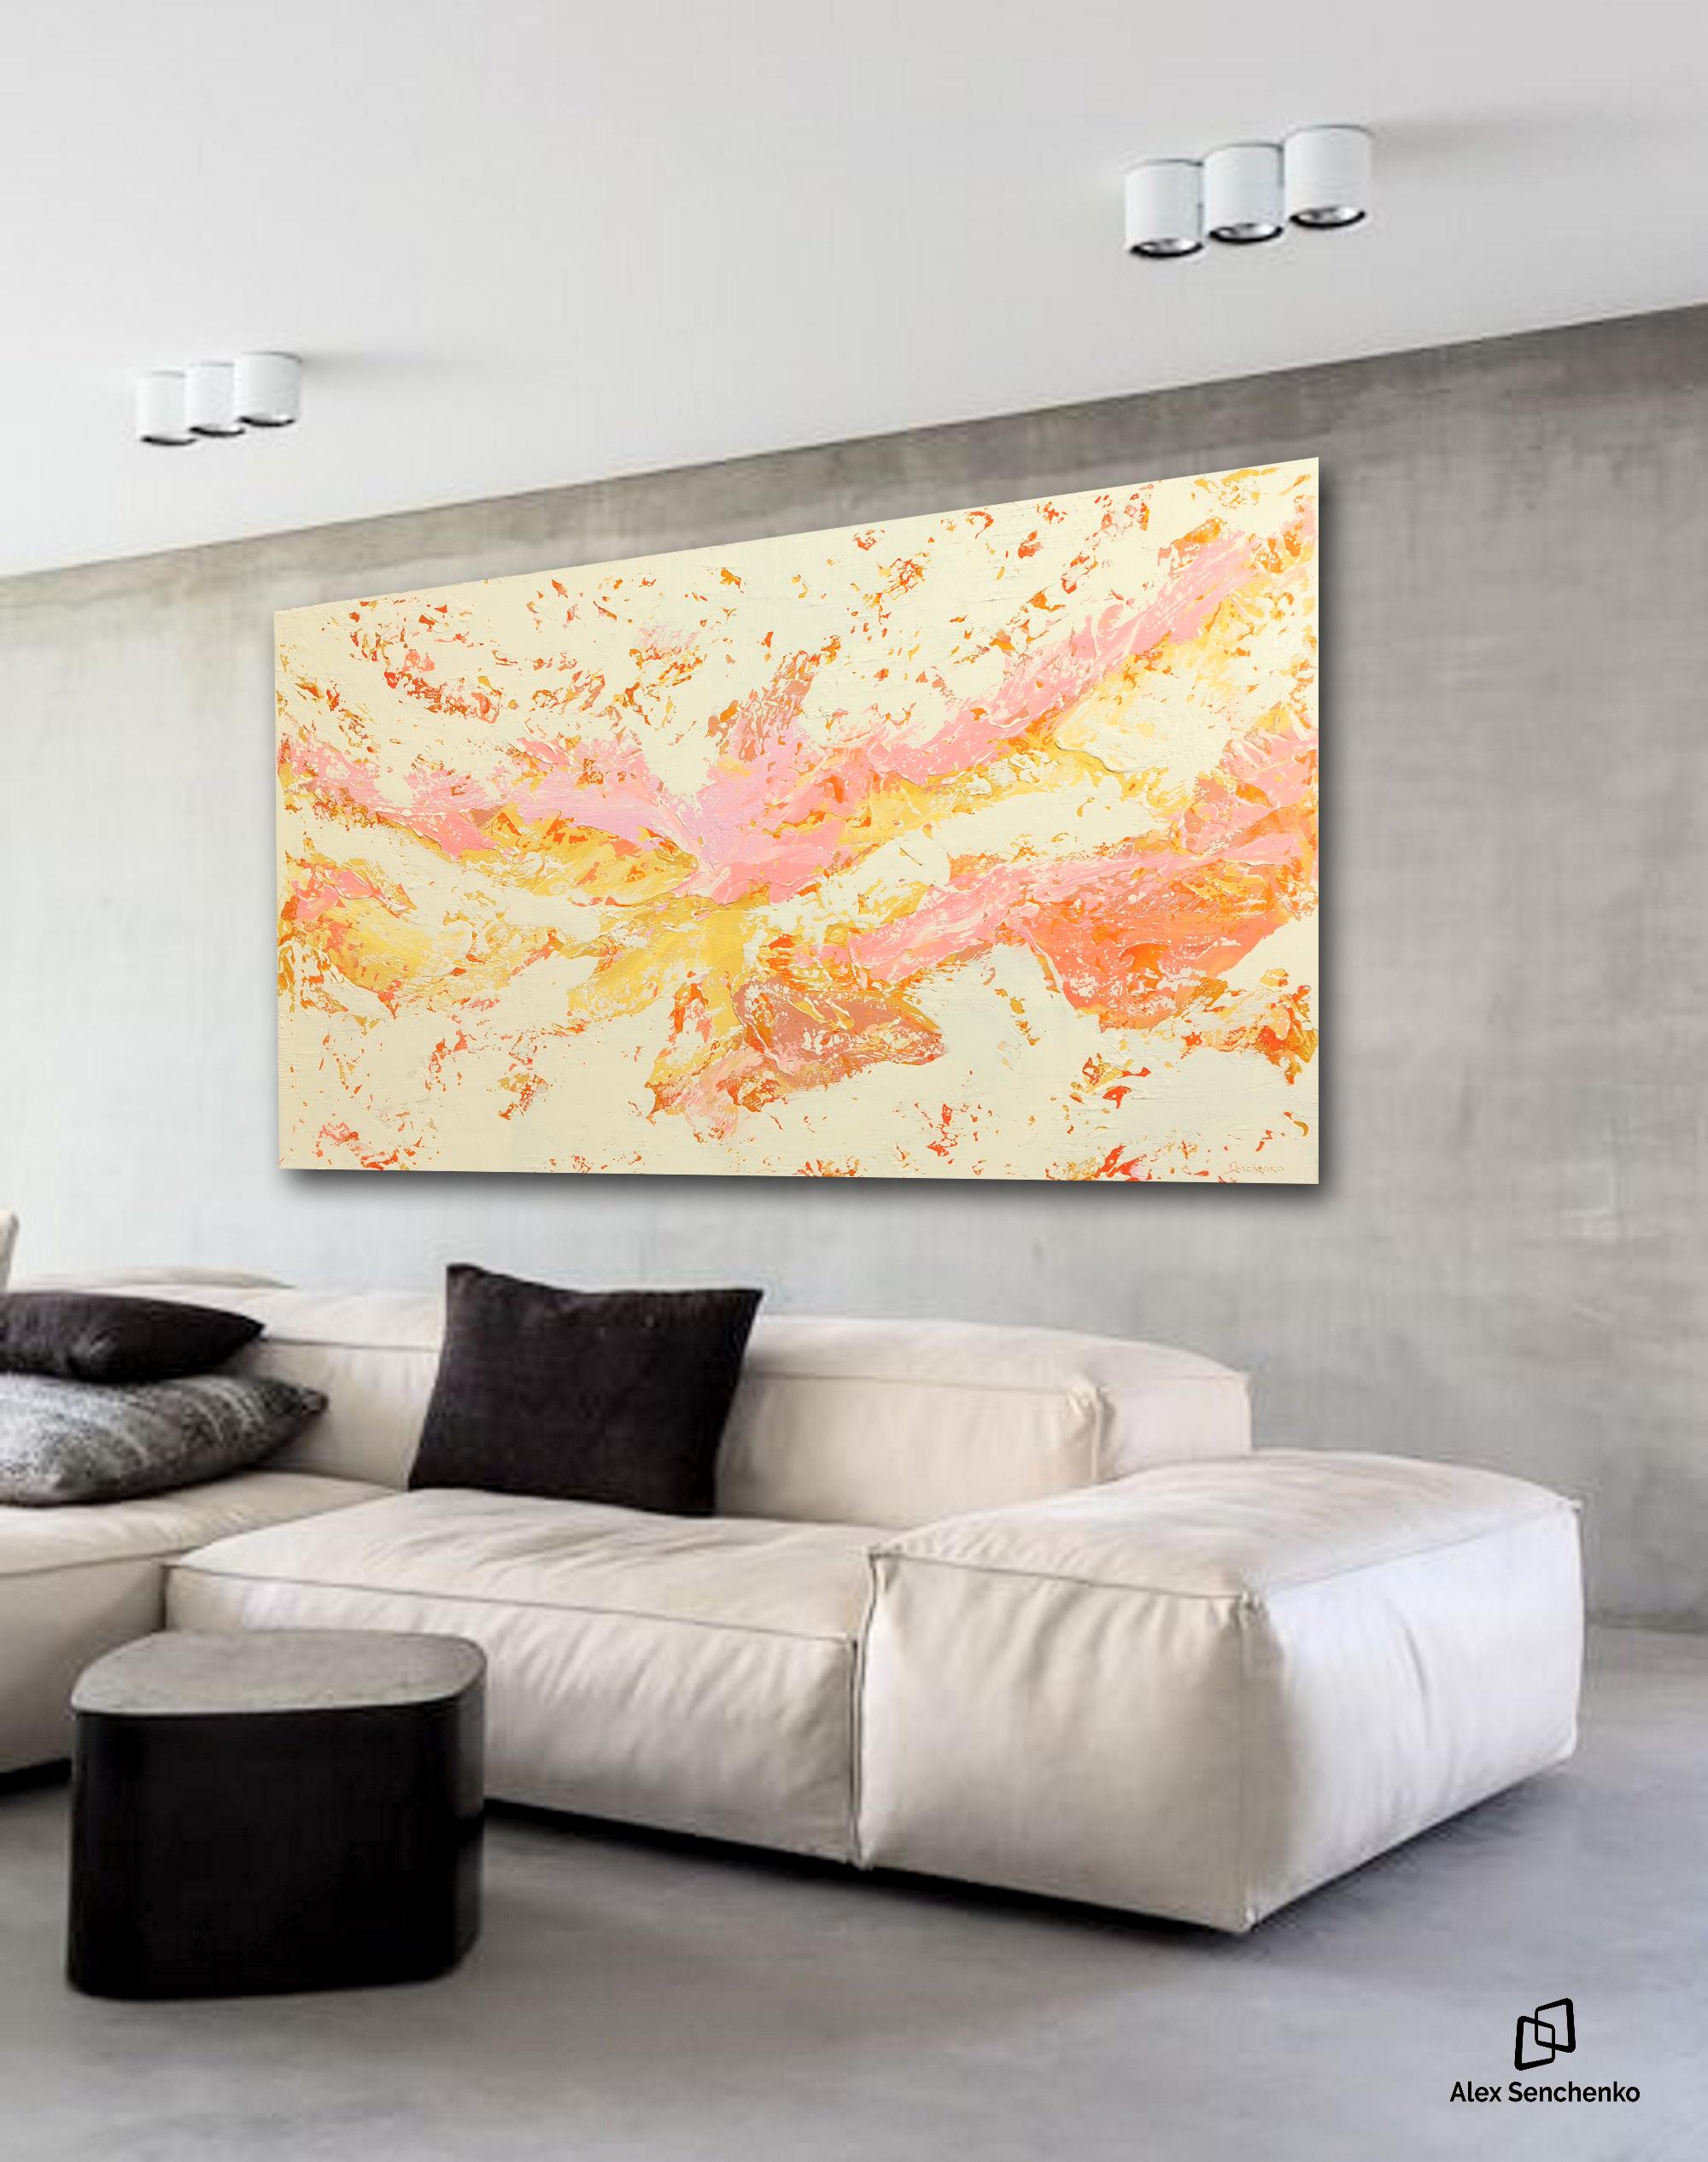 There’s something ethereal, almost magical, about contemporary paintings. The
incredible Expressionism bleeds through the canvas, transforming any room into an
entirely new experience. Alex Senchenko’s ,, Abstract 2176 ,, painting will give your